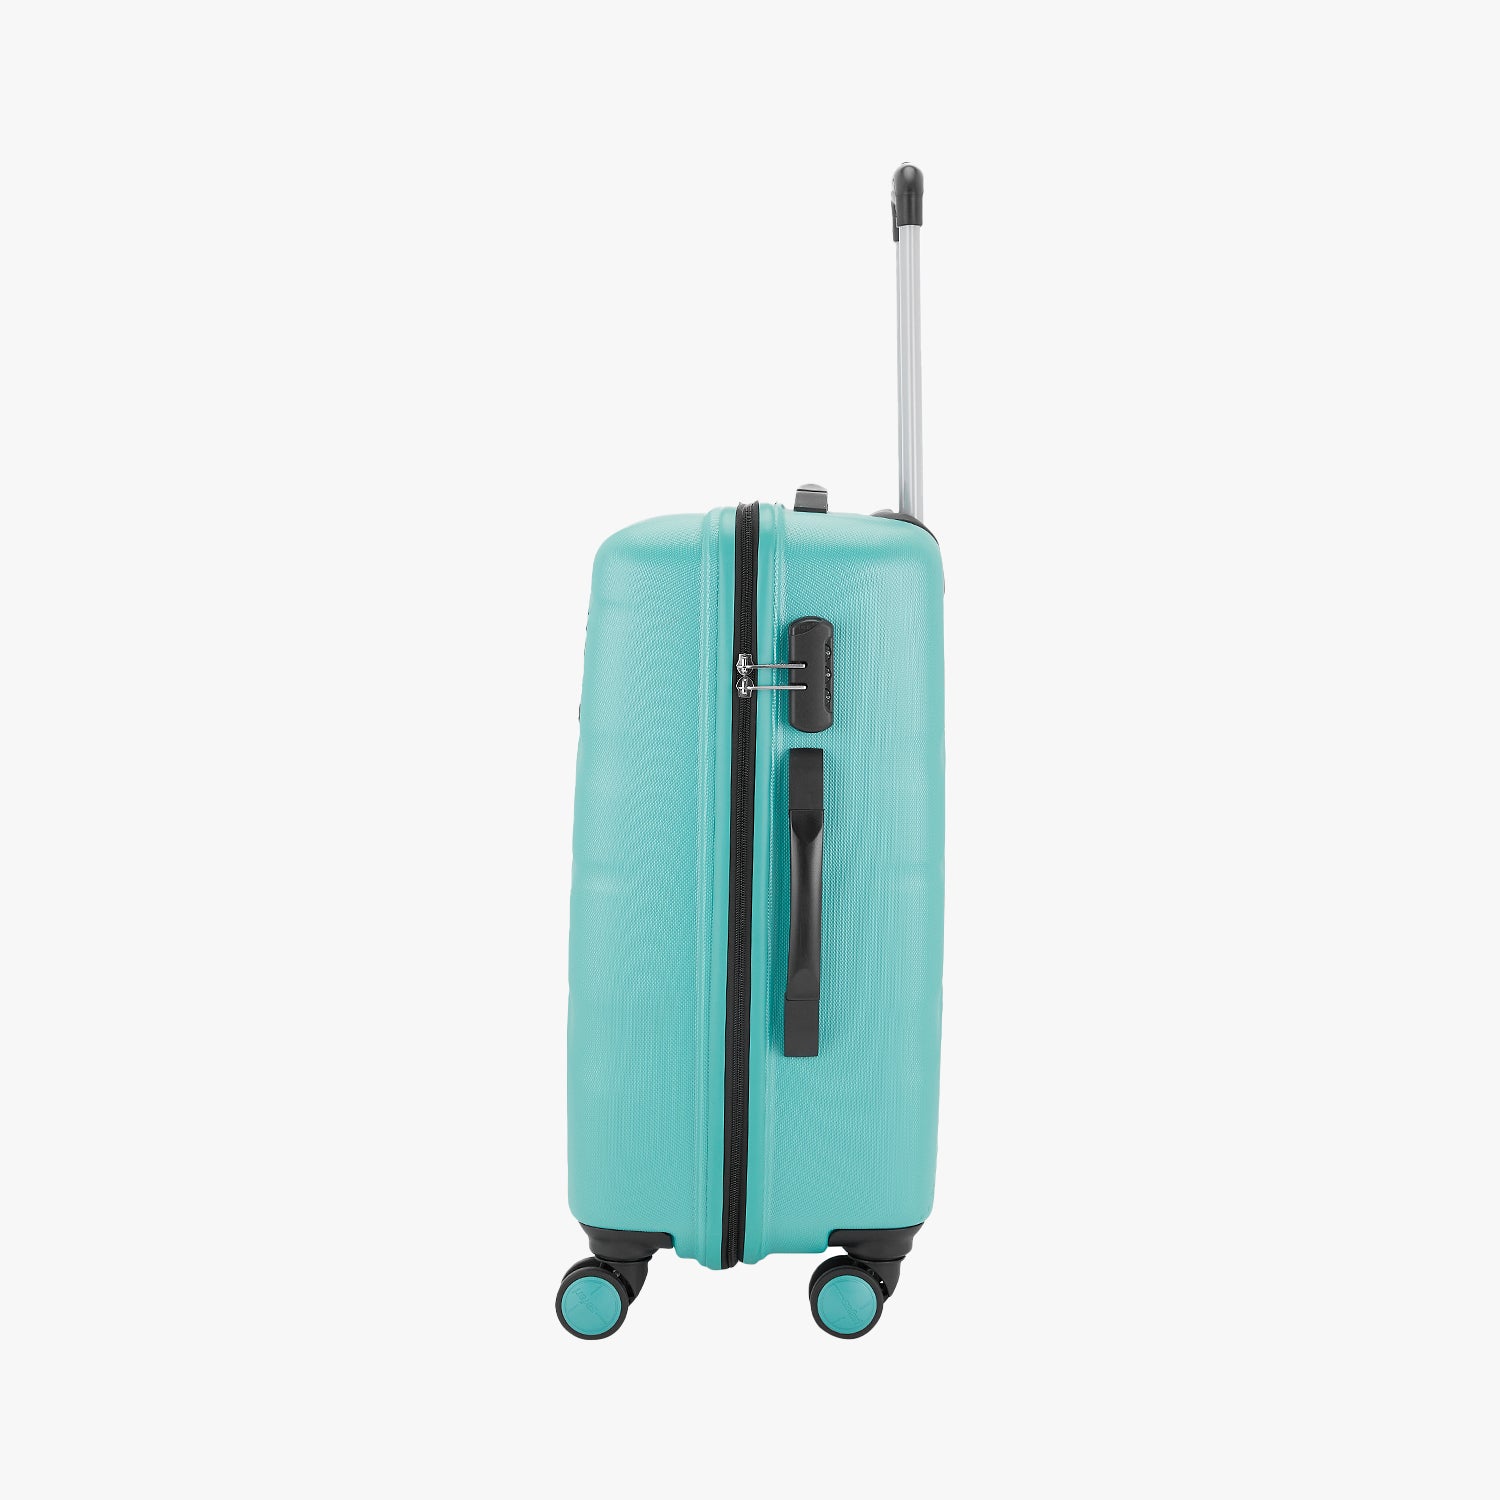 Persia Hard Luggage with Dual Wheels Combo (Small and Medium)- Spearmint